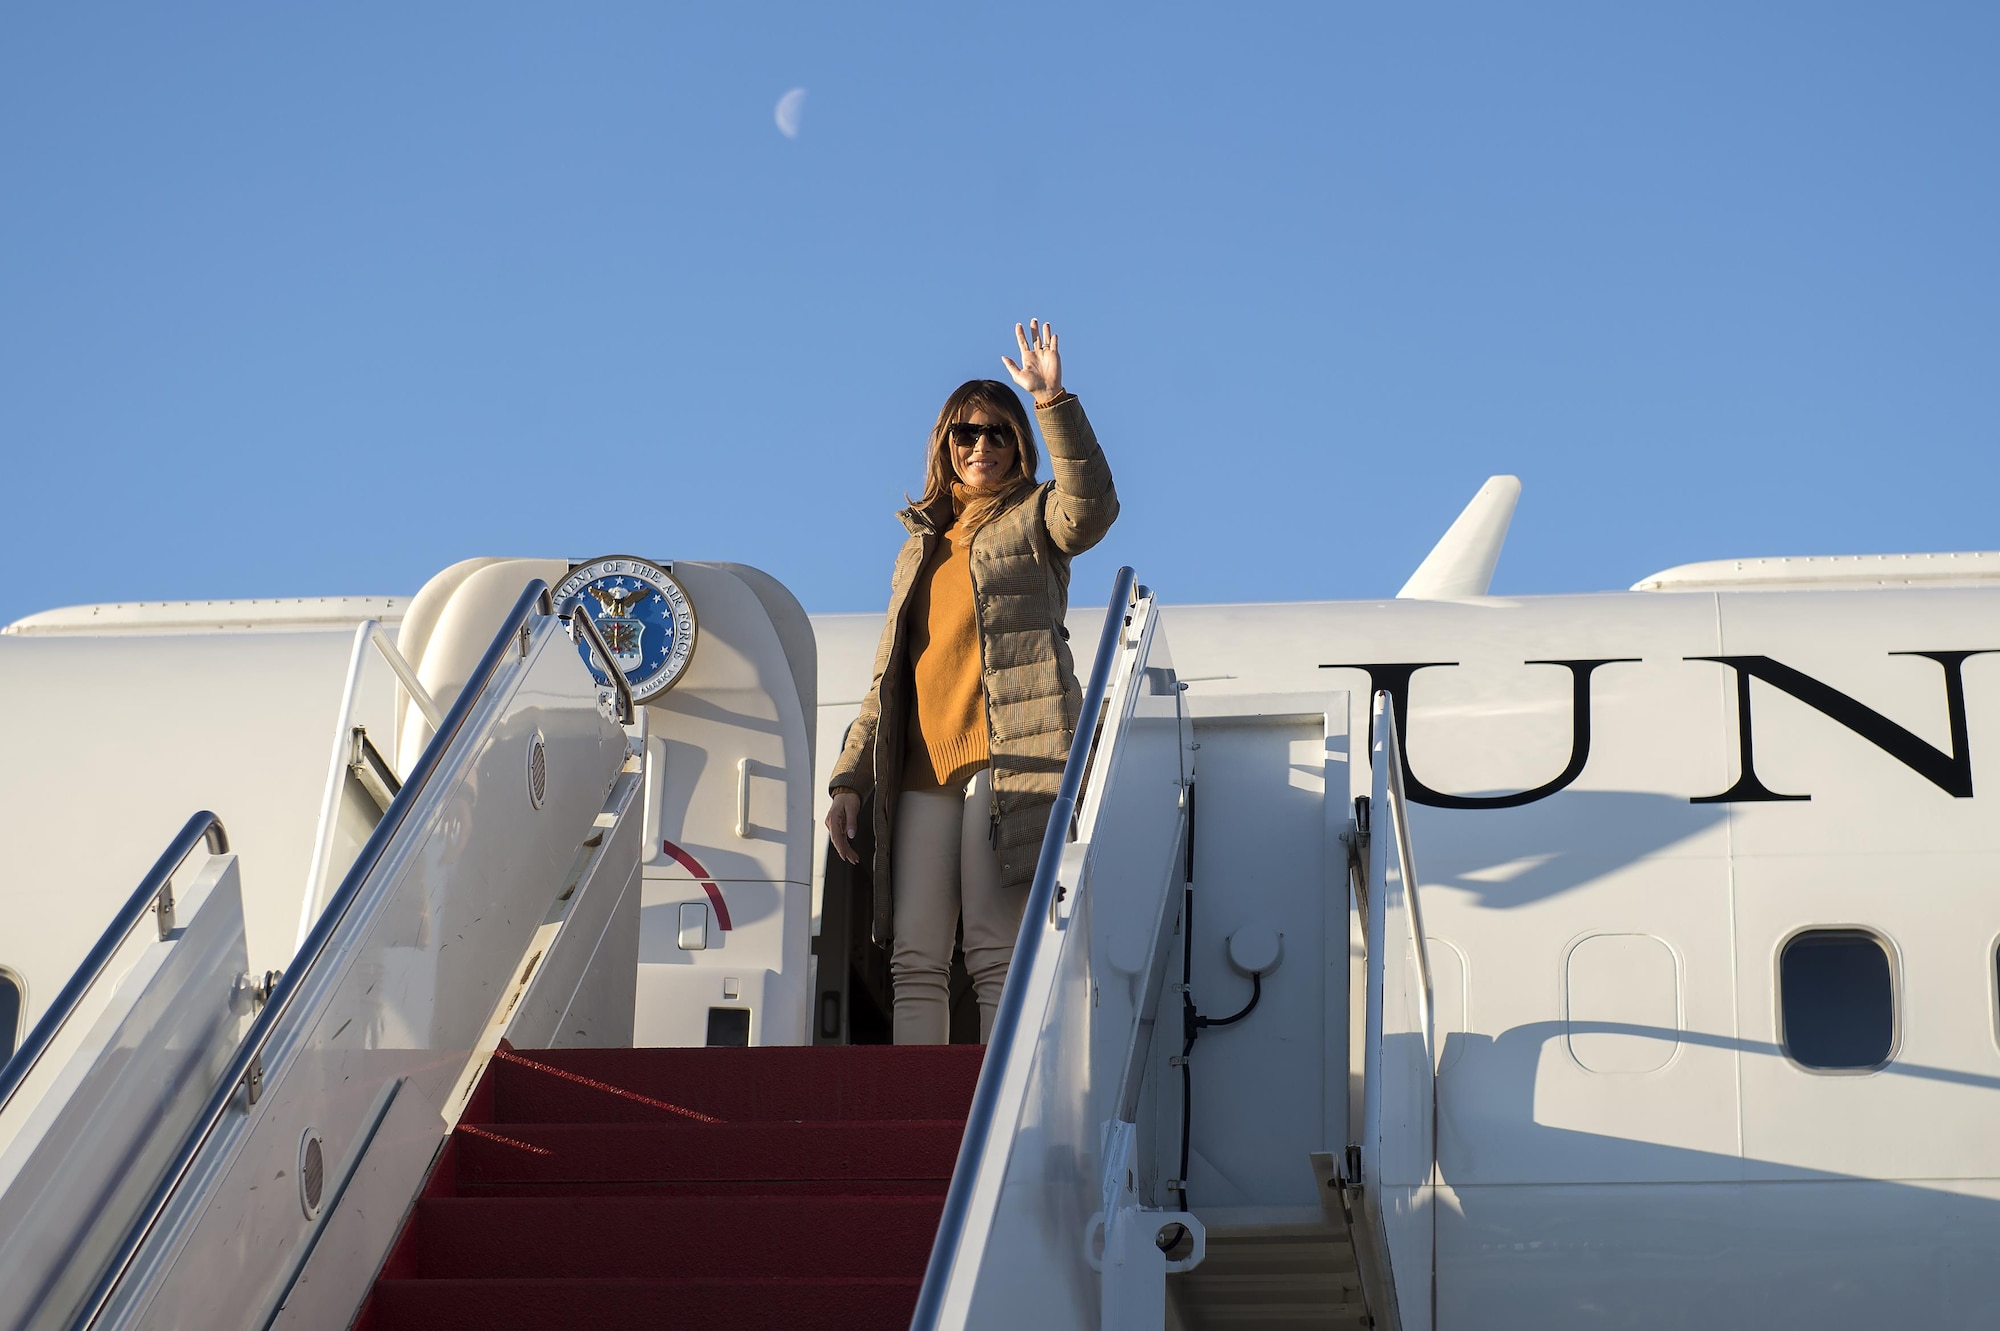 First Lady Melania Trump departs Joint Base Elmendorf-Richardson, Alaska, Nov. 10, 2017. The First Lady was returning from a Pacific Theater tour she attended with President Donald Trump. She attended the Month of the Military Family Celebration event held at the Arctic Oasis.